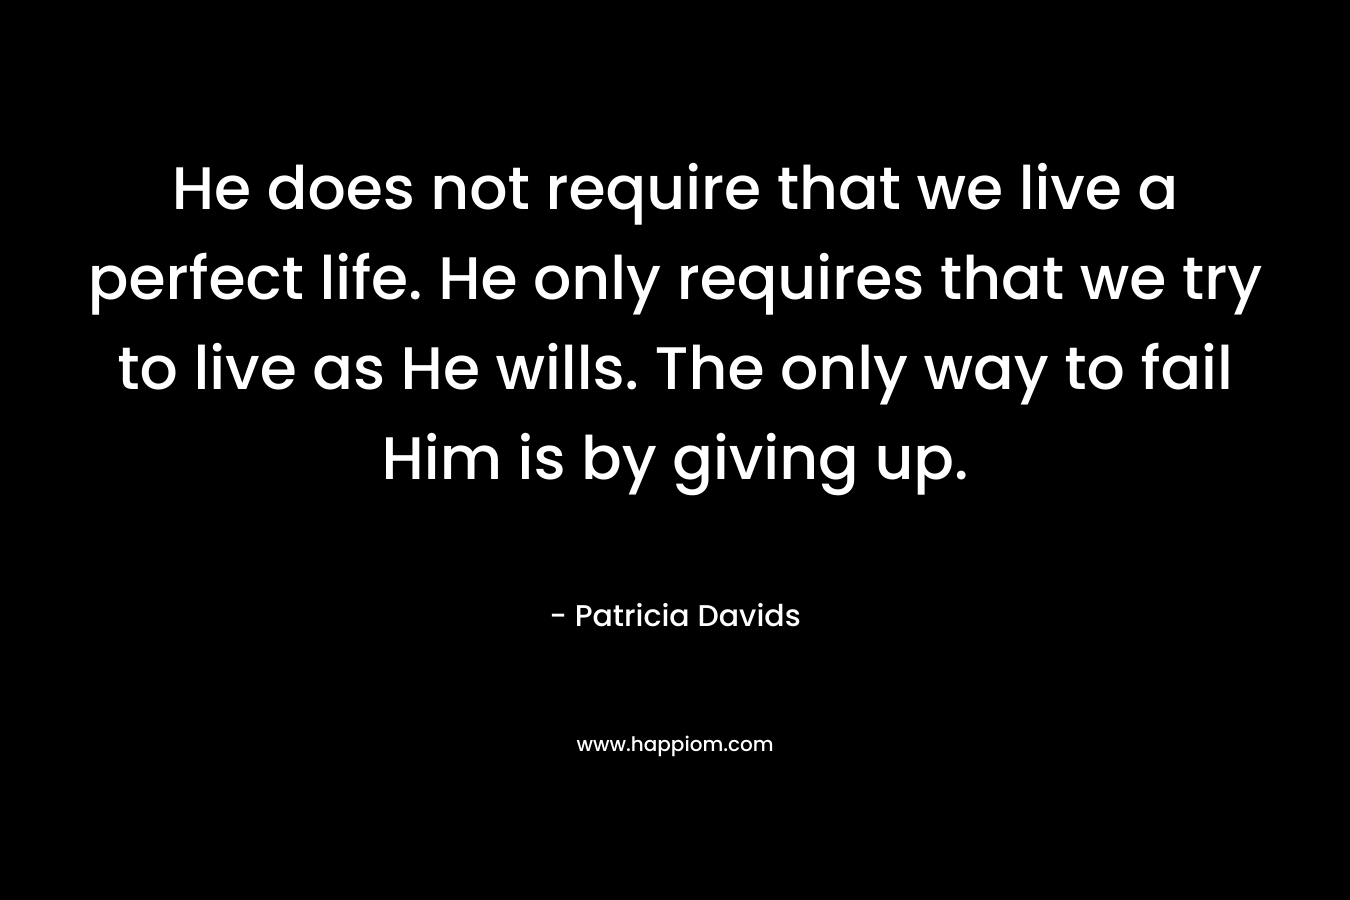 He does not require that we live a perfect life. He only requires that we try to live as He wills. The only way to fail Him is by giving up. – Patricia Davids